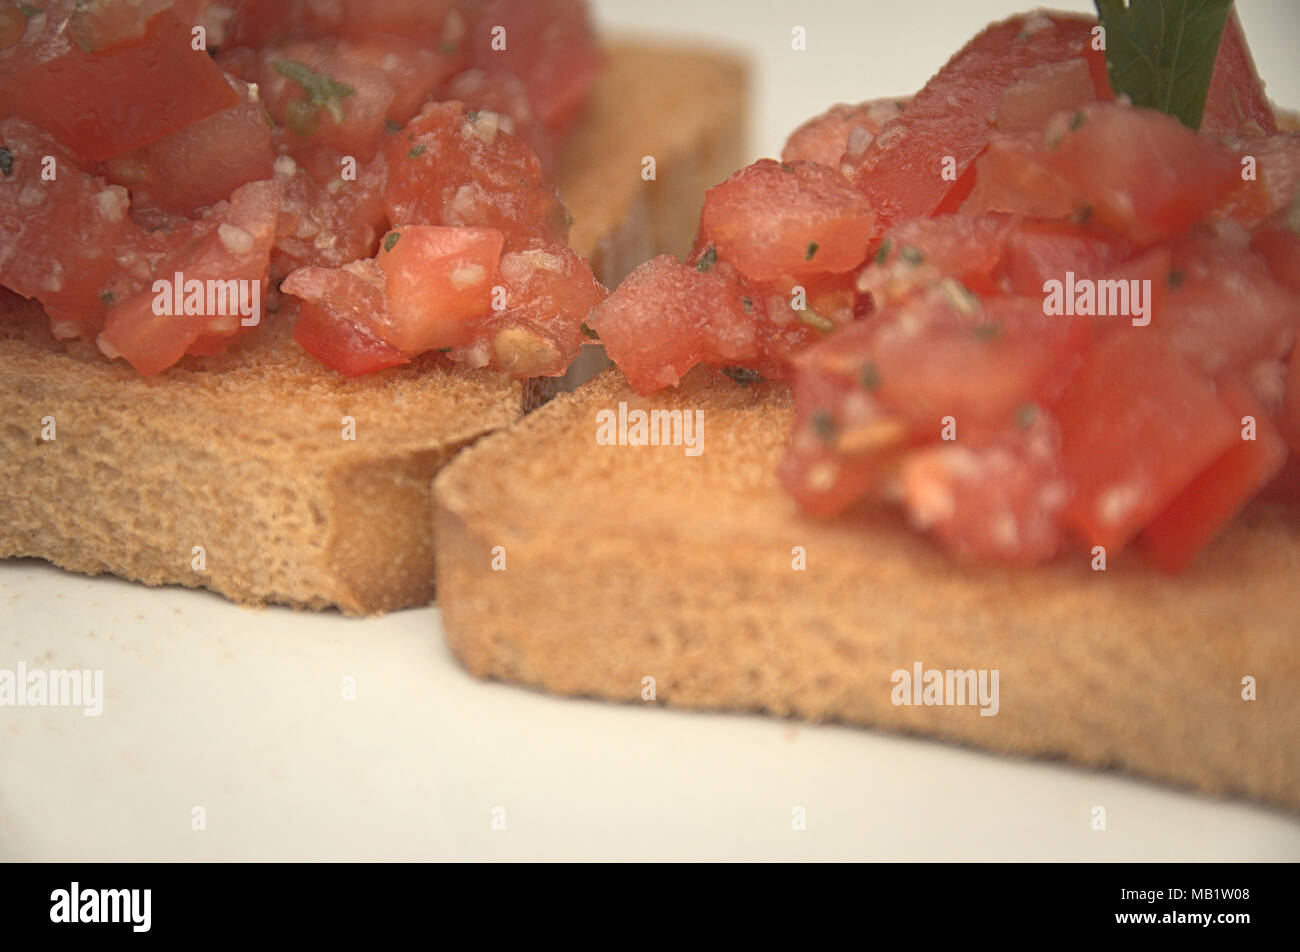 Bruschetta, toast bread with tomato and garlic, pepper, spices and something green on top. Crisp and tasty Mediterranean food. Stock Photo